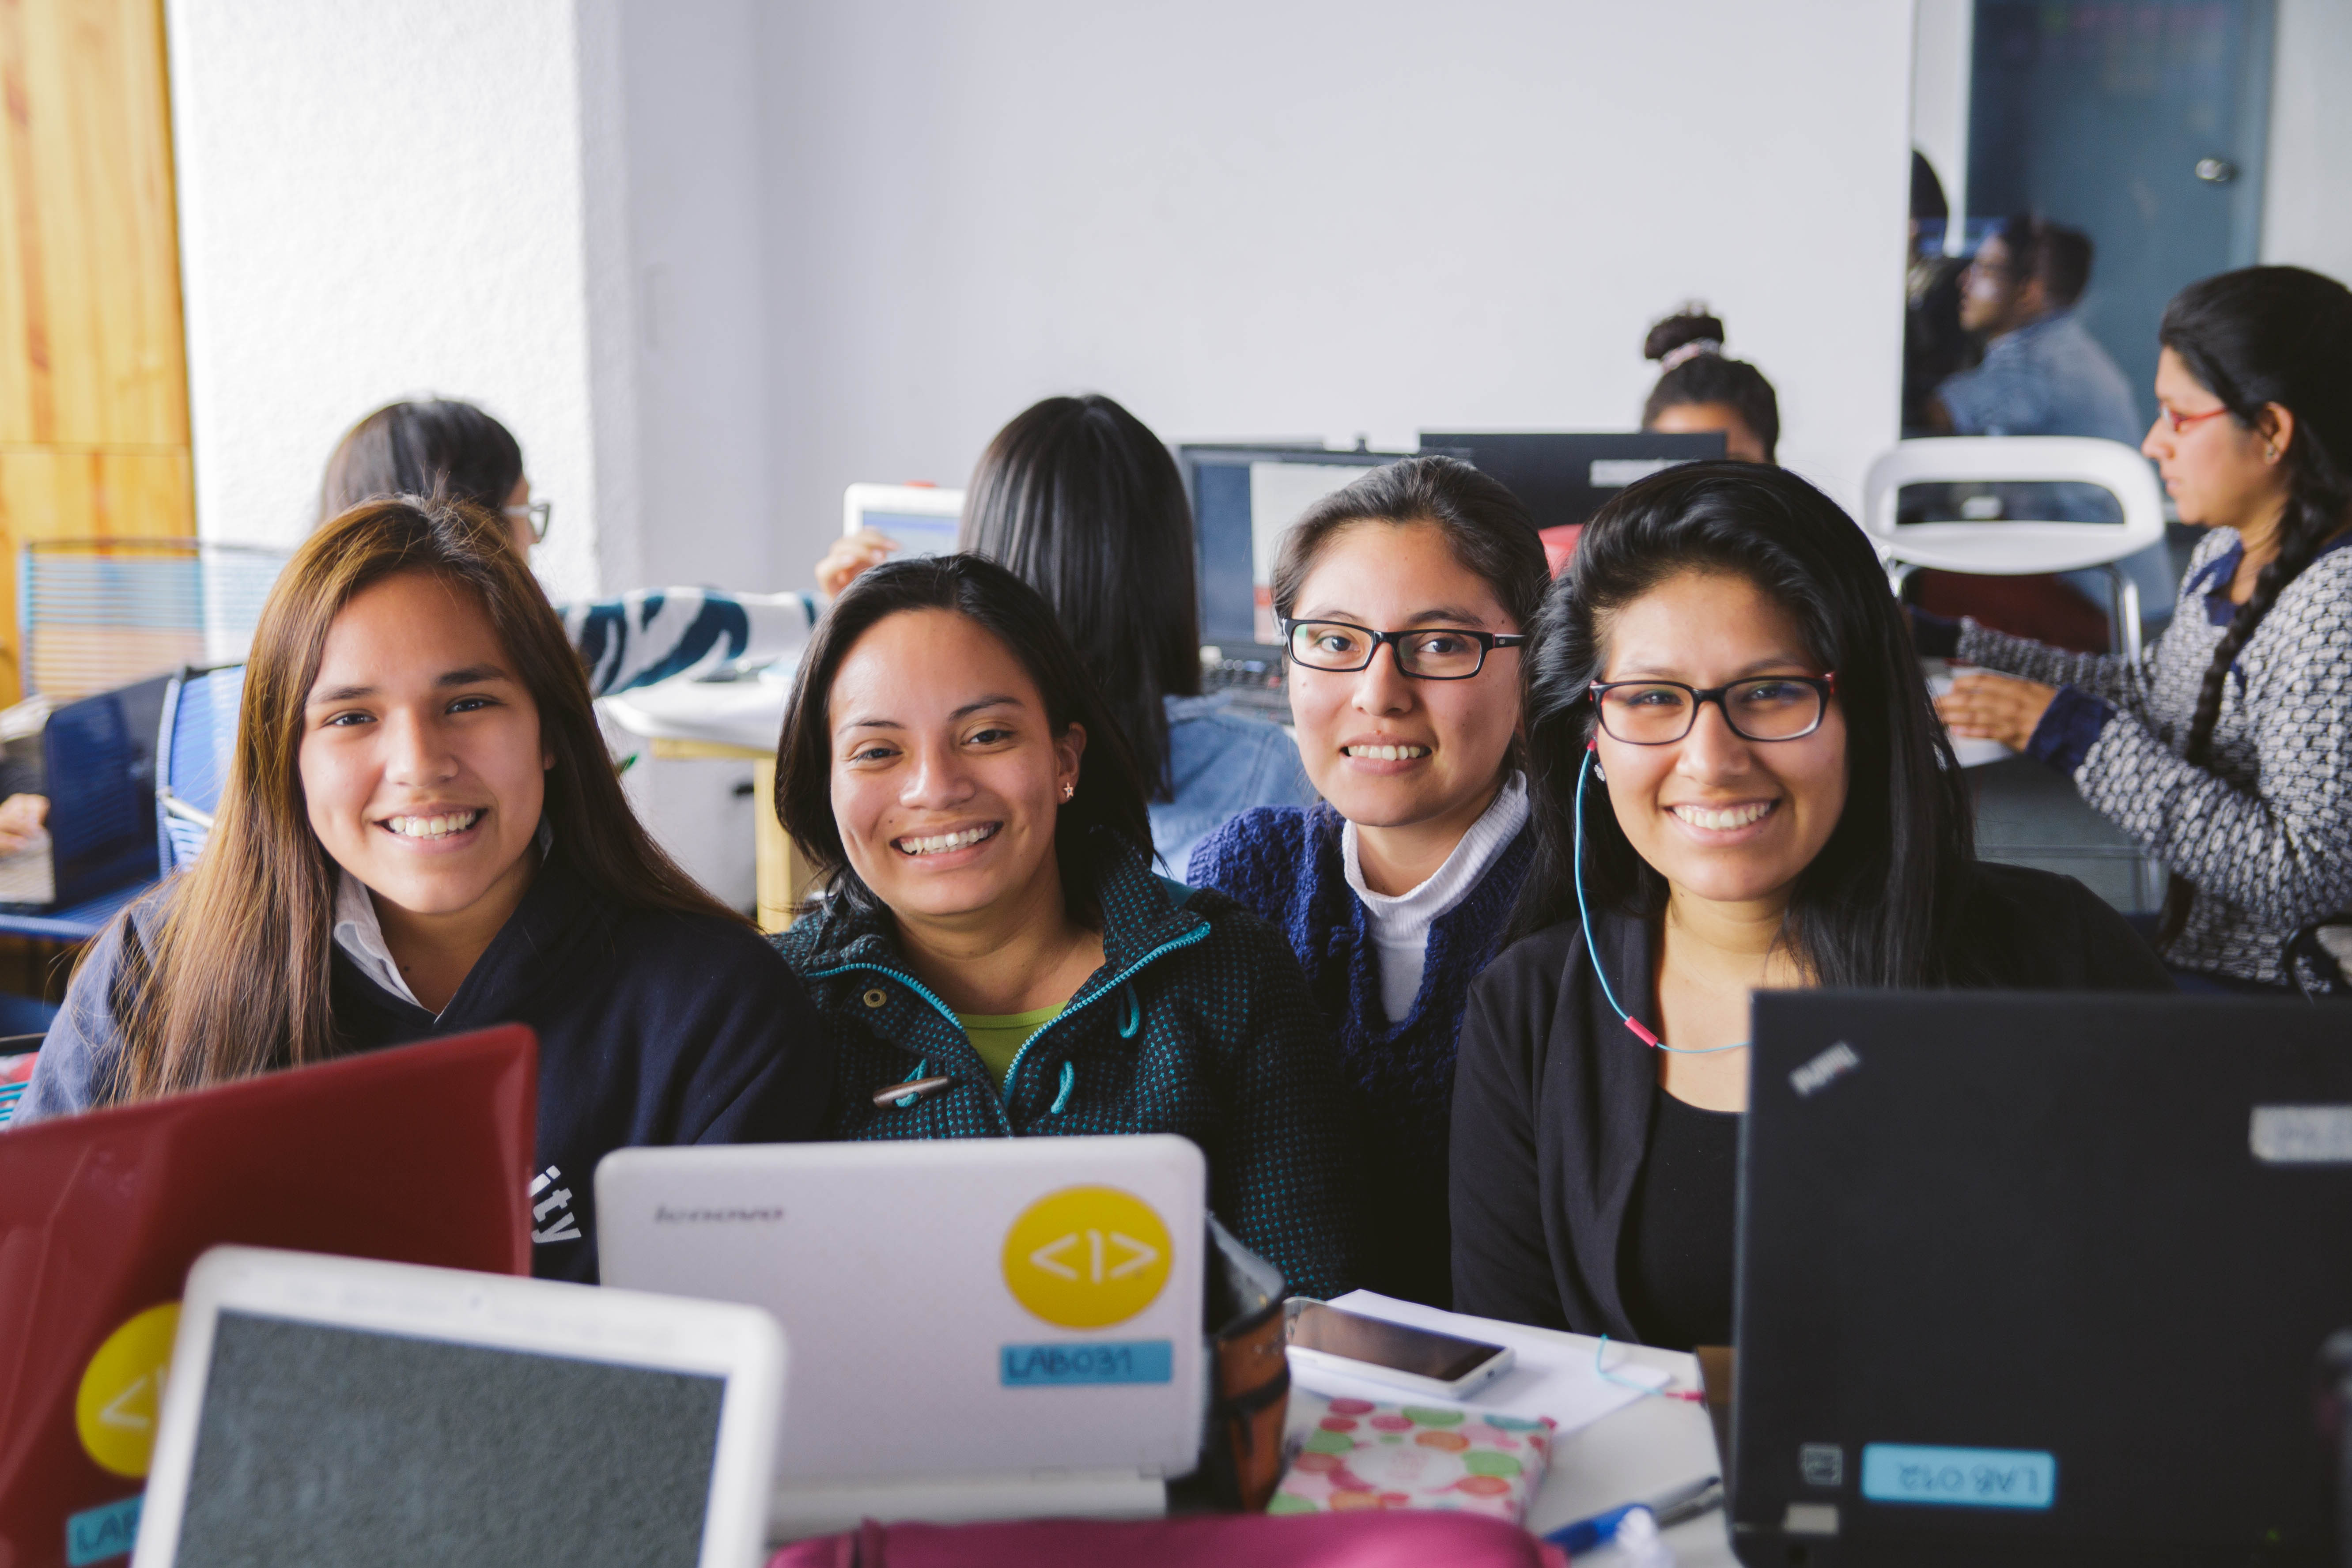 The Laboratoria, which started in Lima, Peru, empowers young women by giving them access to education and work in the technology sector.